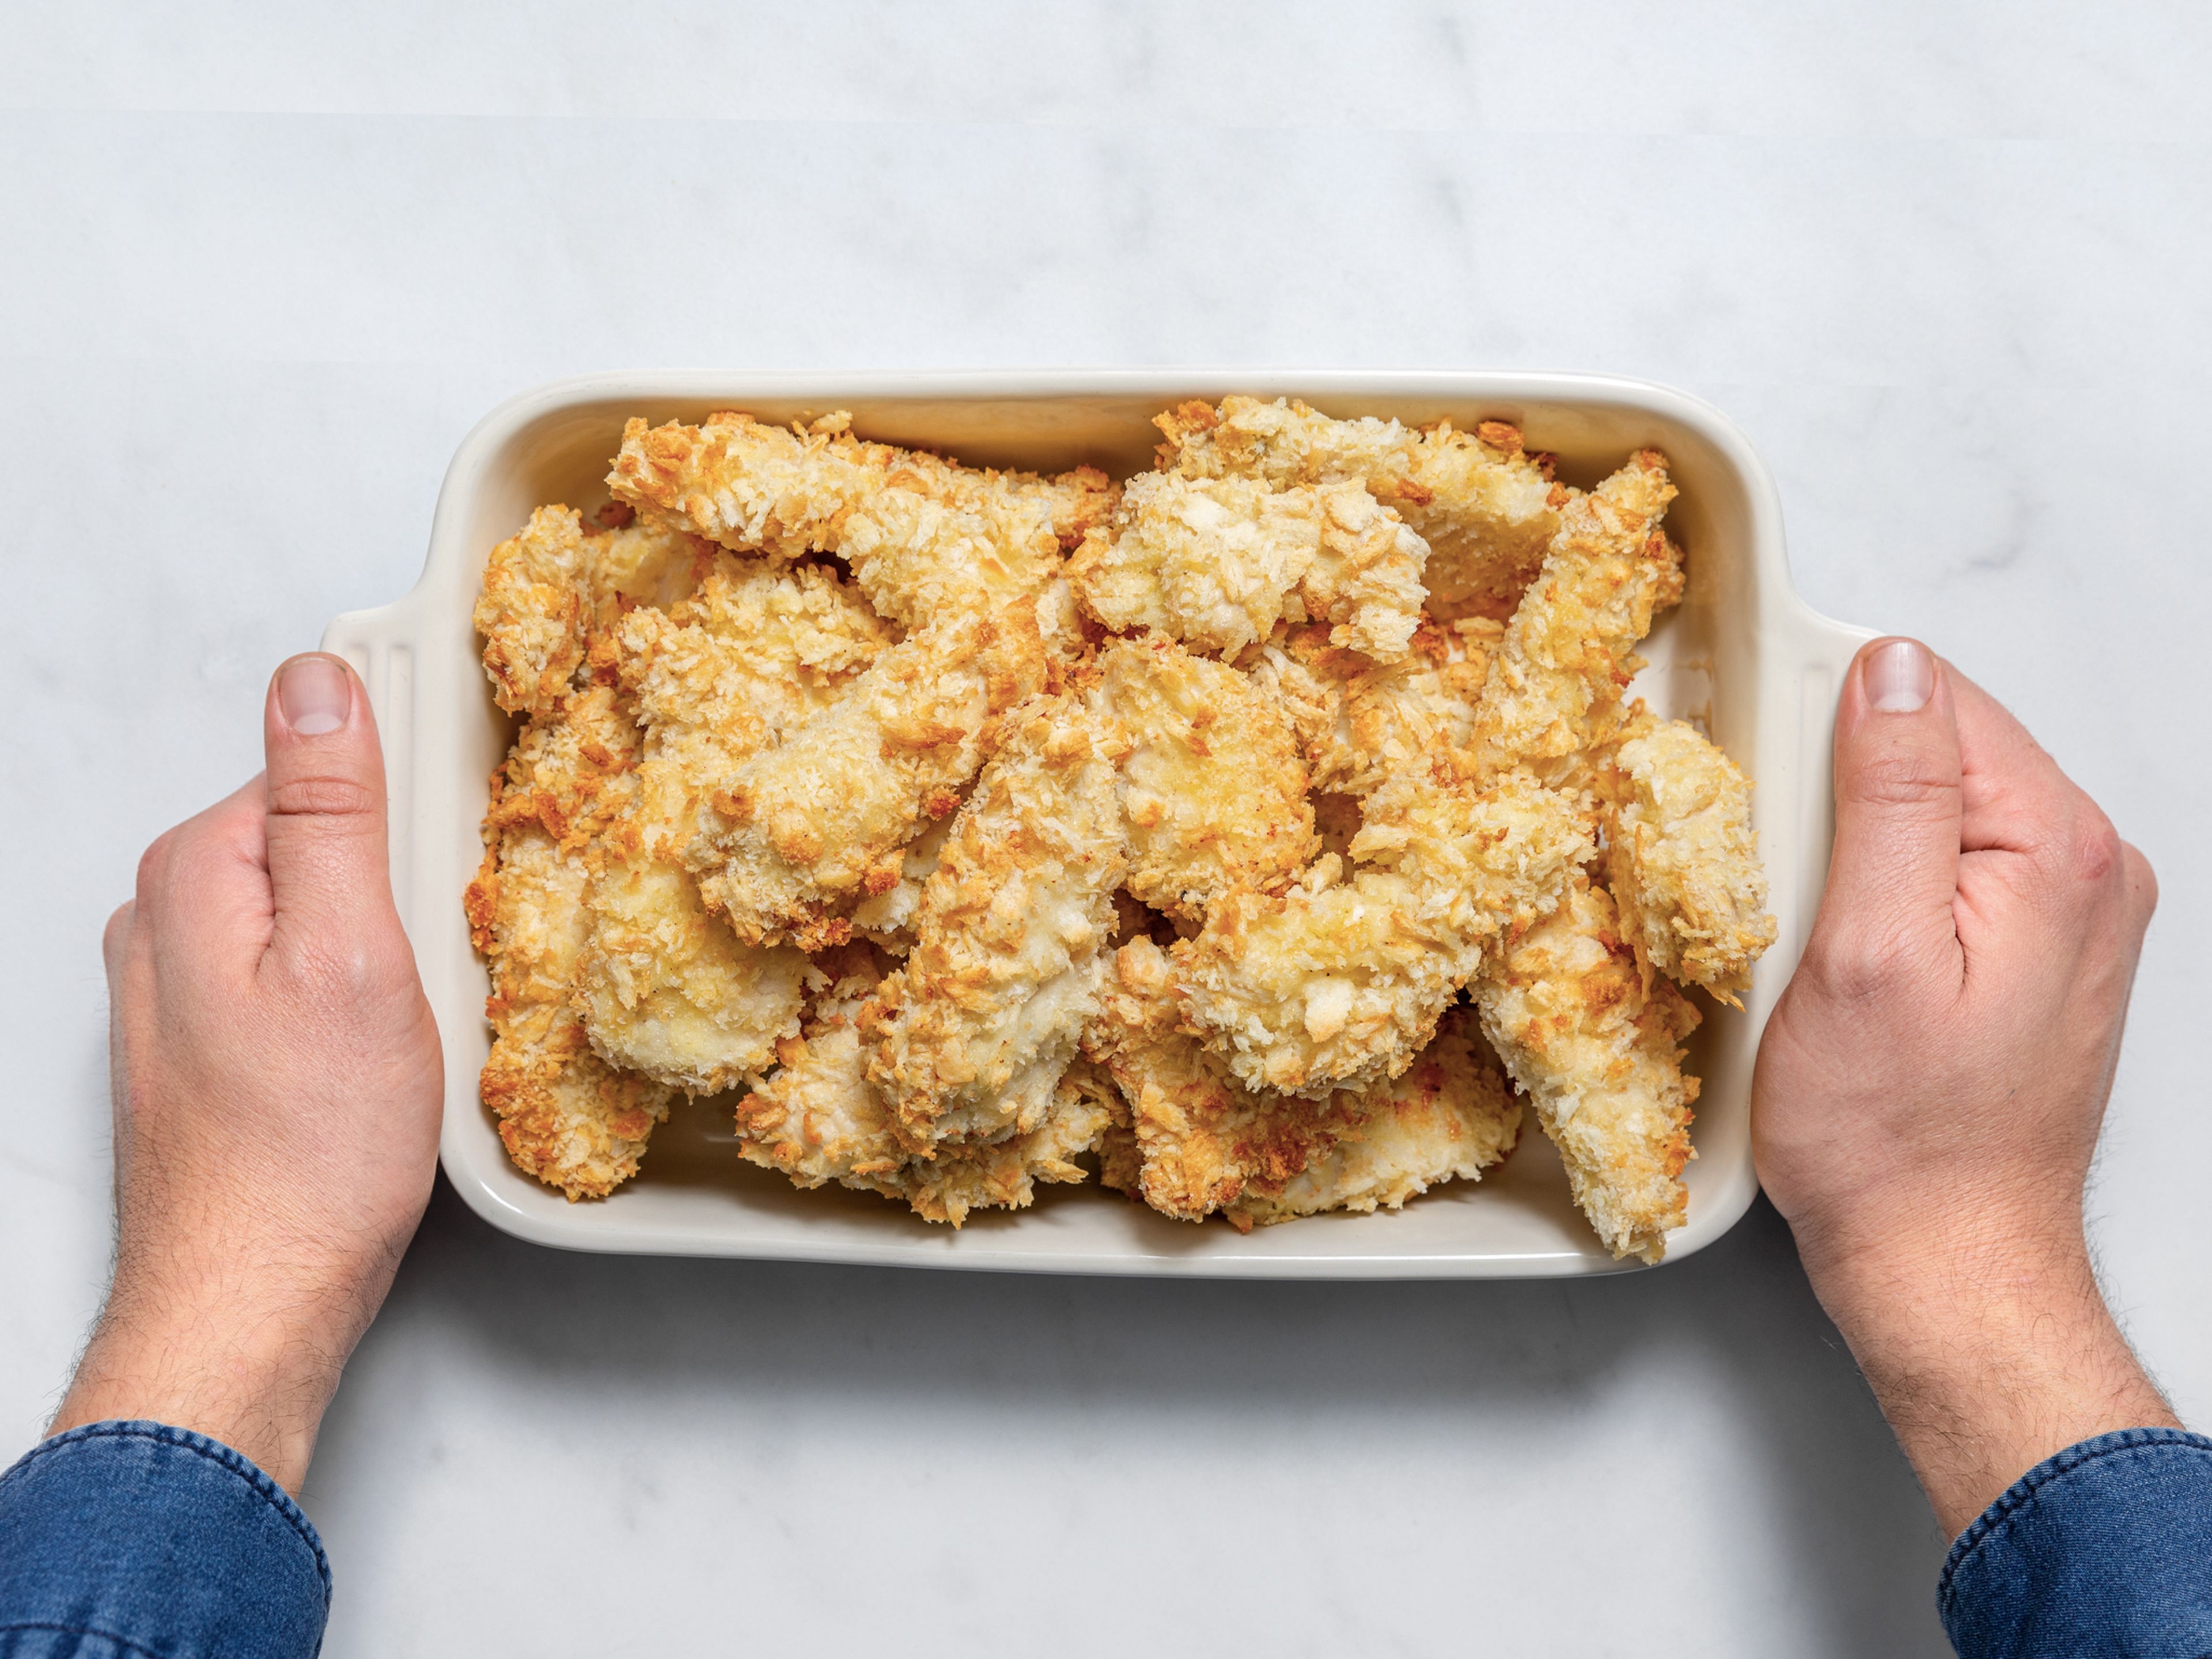 Bake at 200°C/400°F until golden brown and cooked through, approx. 15 min. Serve chicken strips immediately with various dips of your choice. Enjoy!